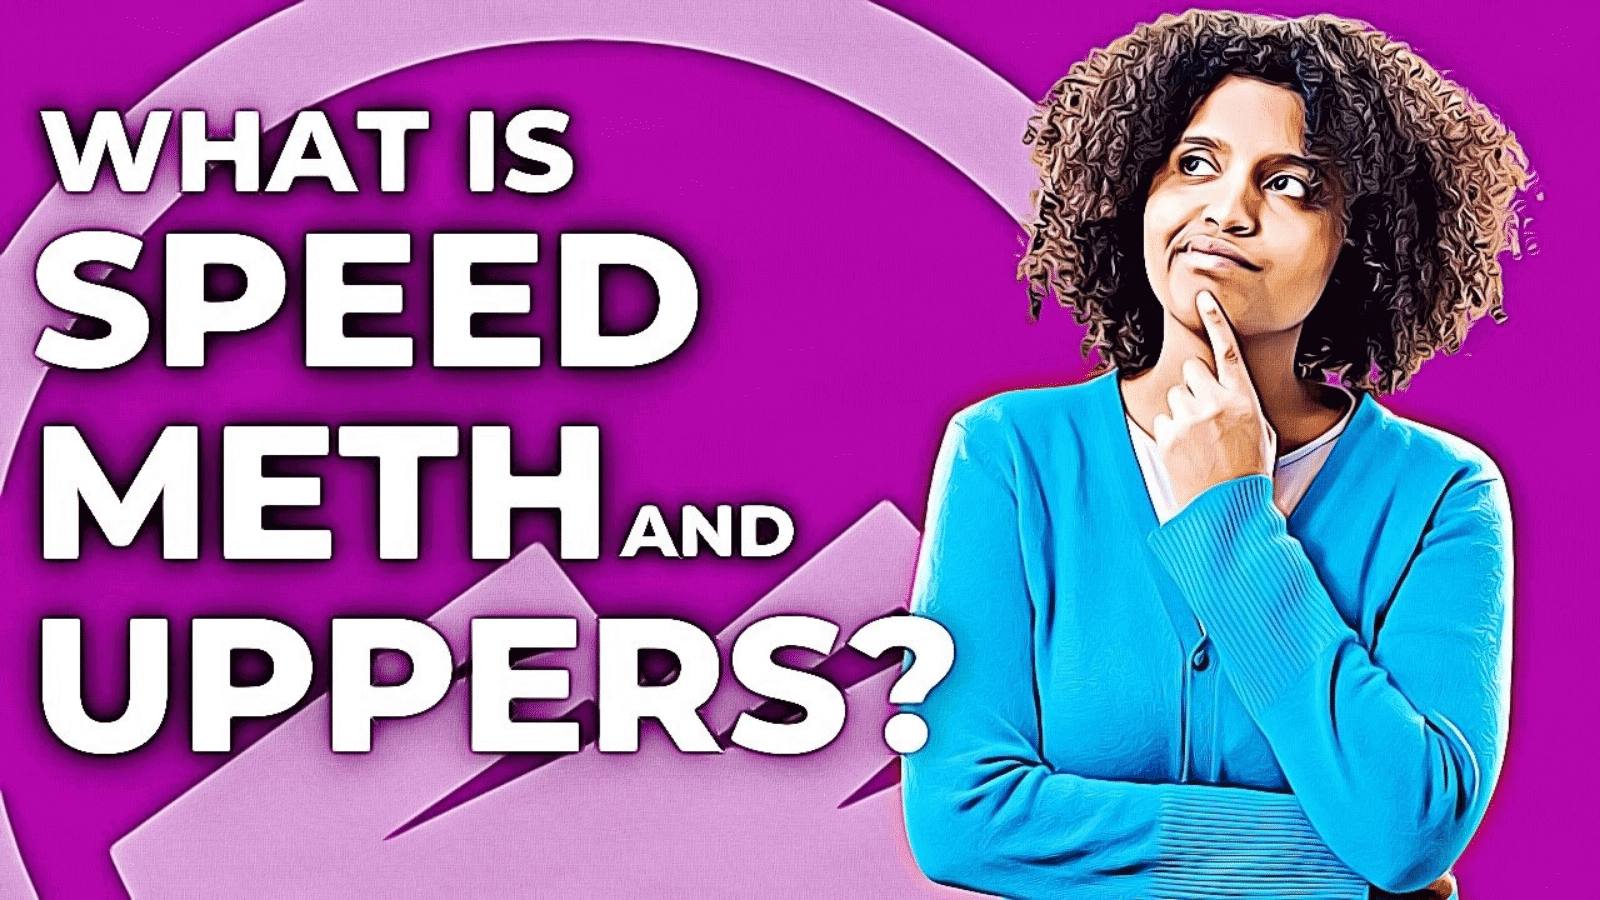 What is speed meth and uppers_video thumbnail